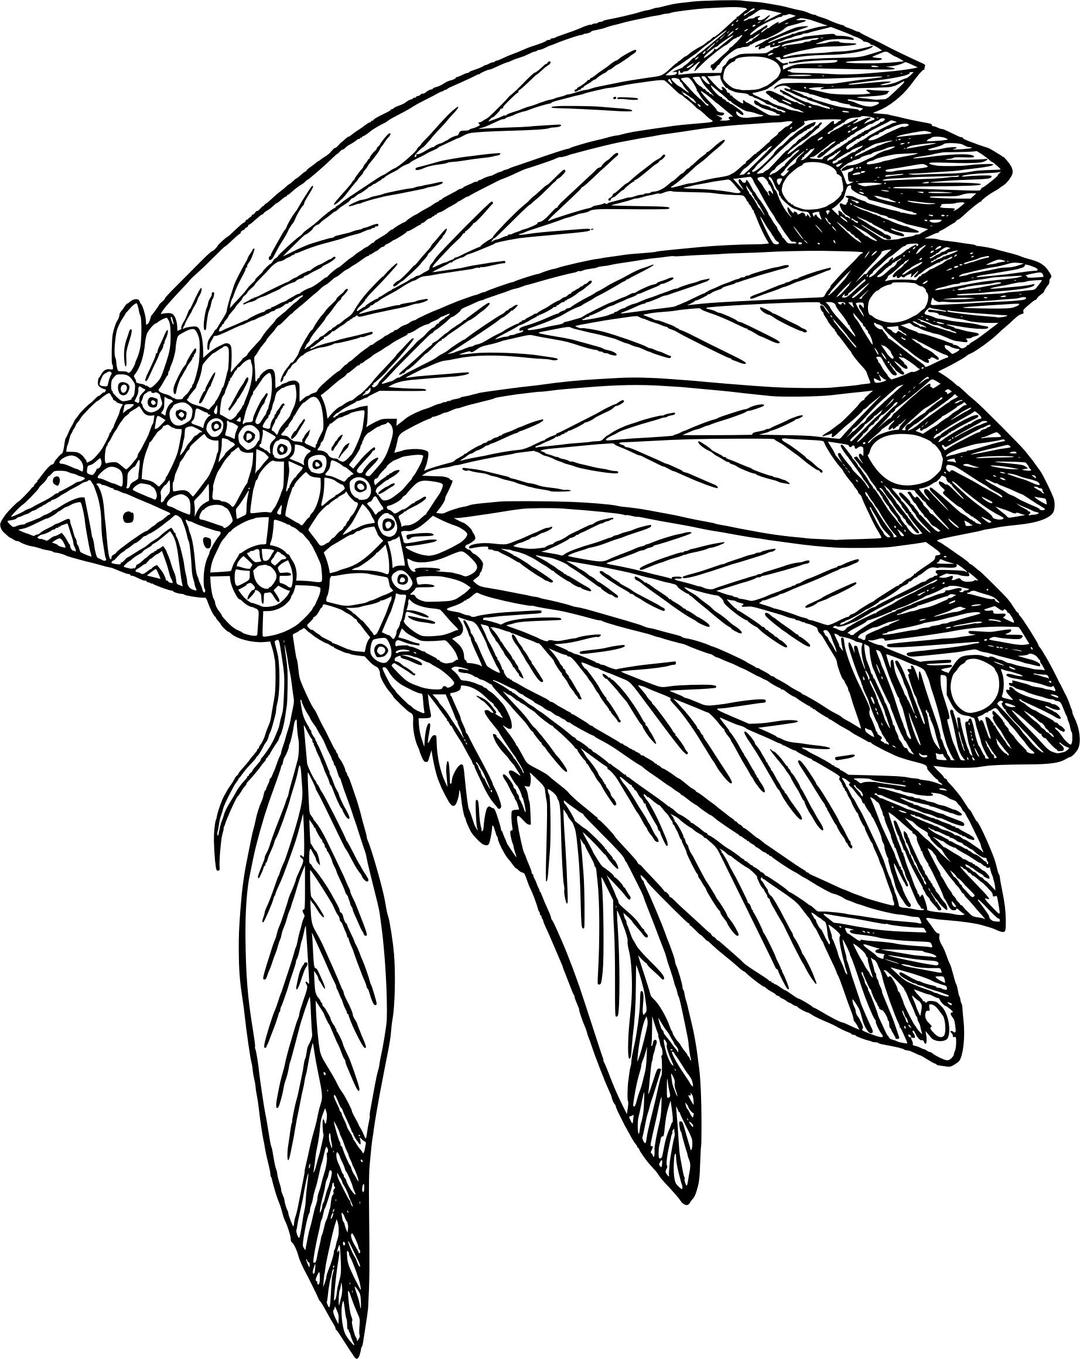 Native American Headdress Trace 2 png transparent